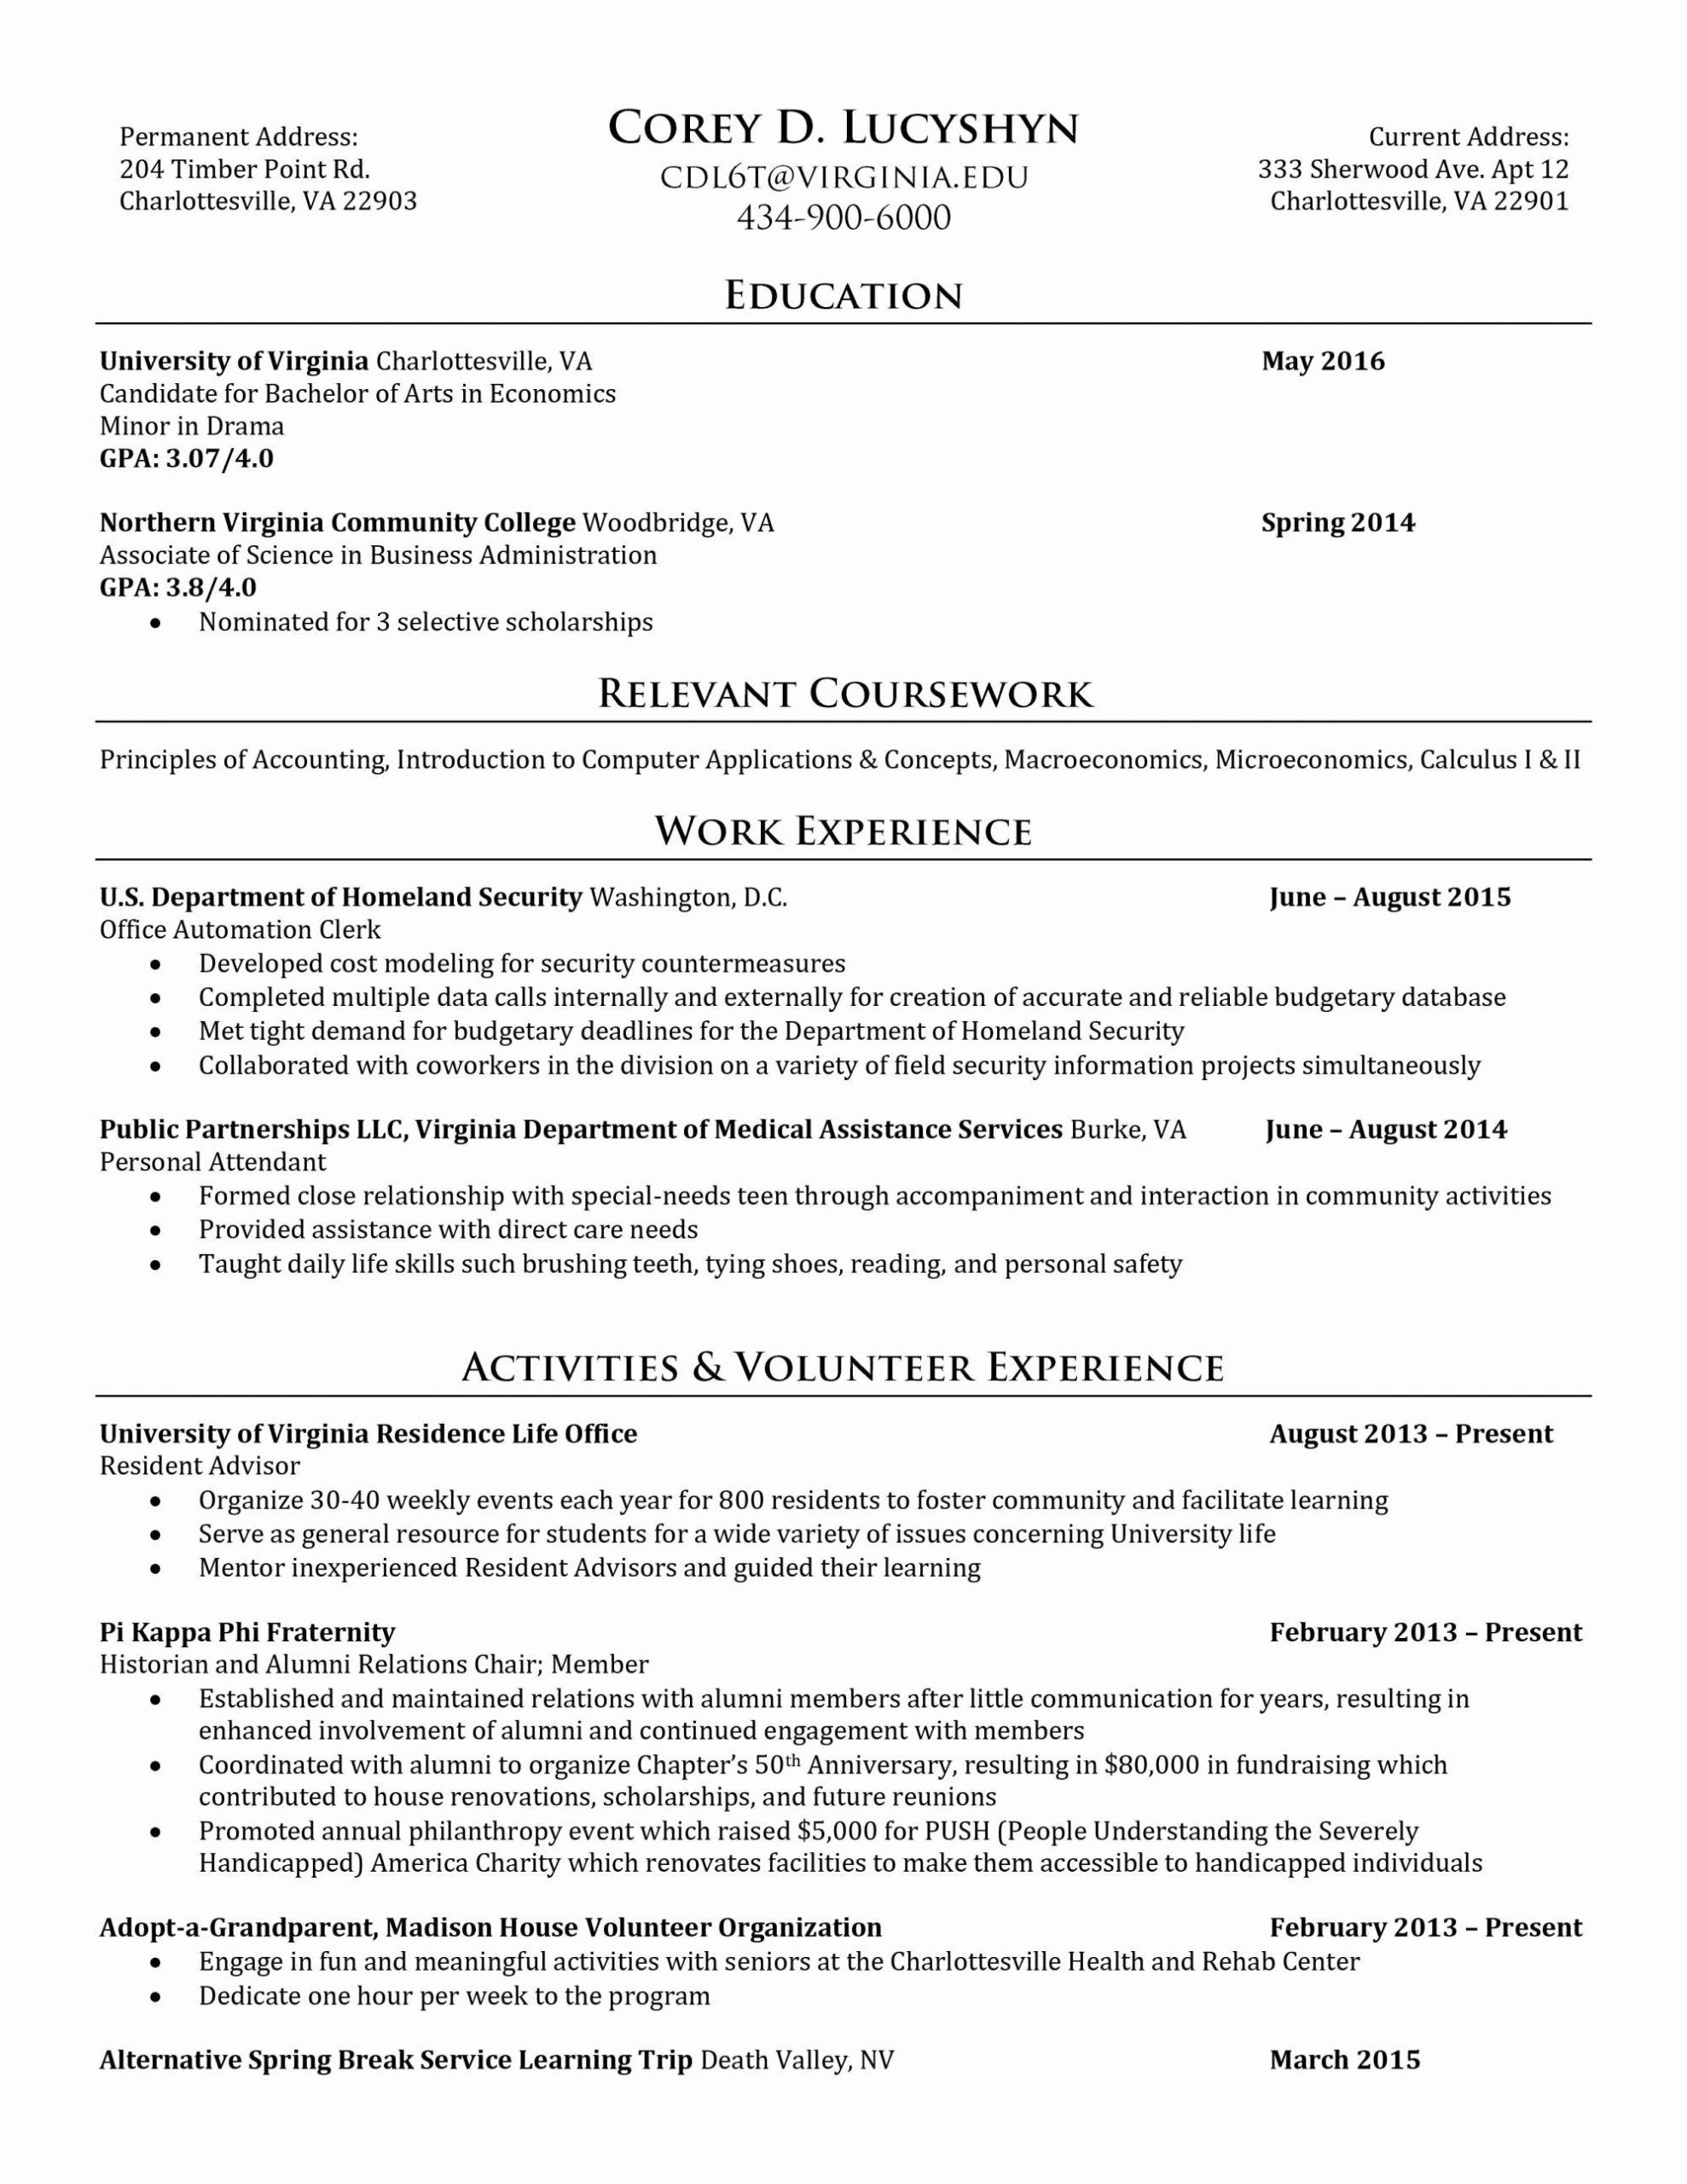 Sample Resume after 1 Year Experience 0-1 Year Experience Resume format – Resume Templates Resume …